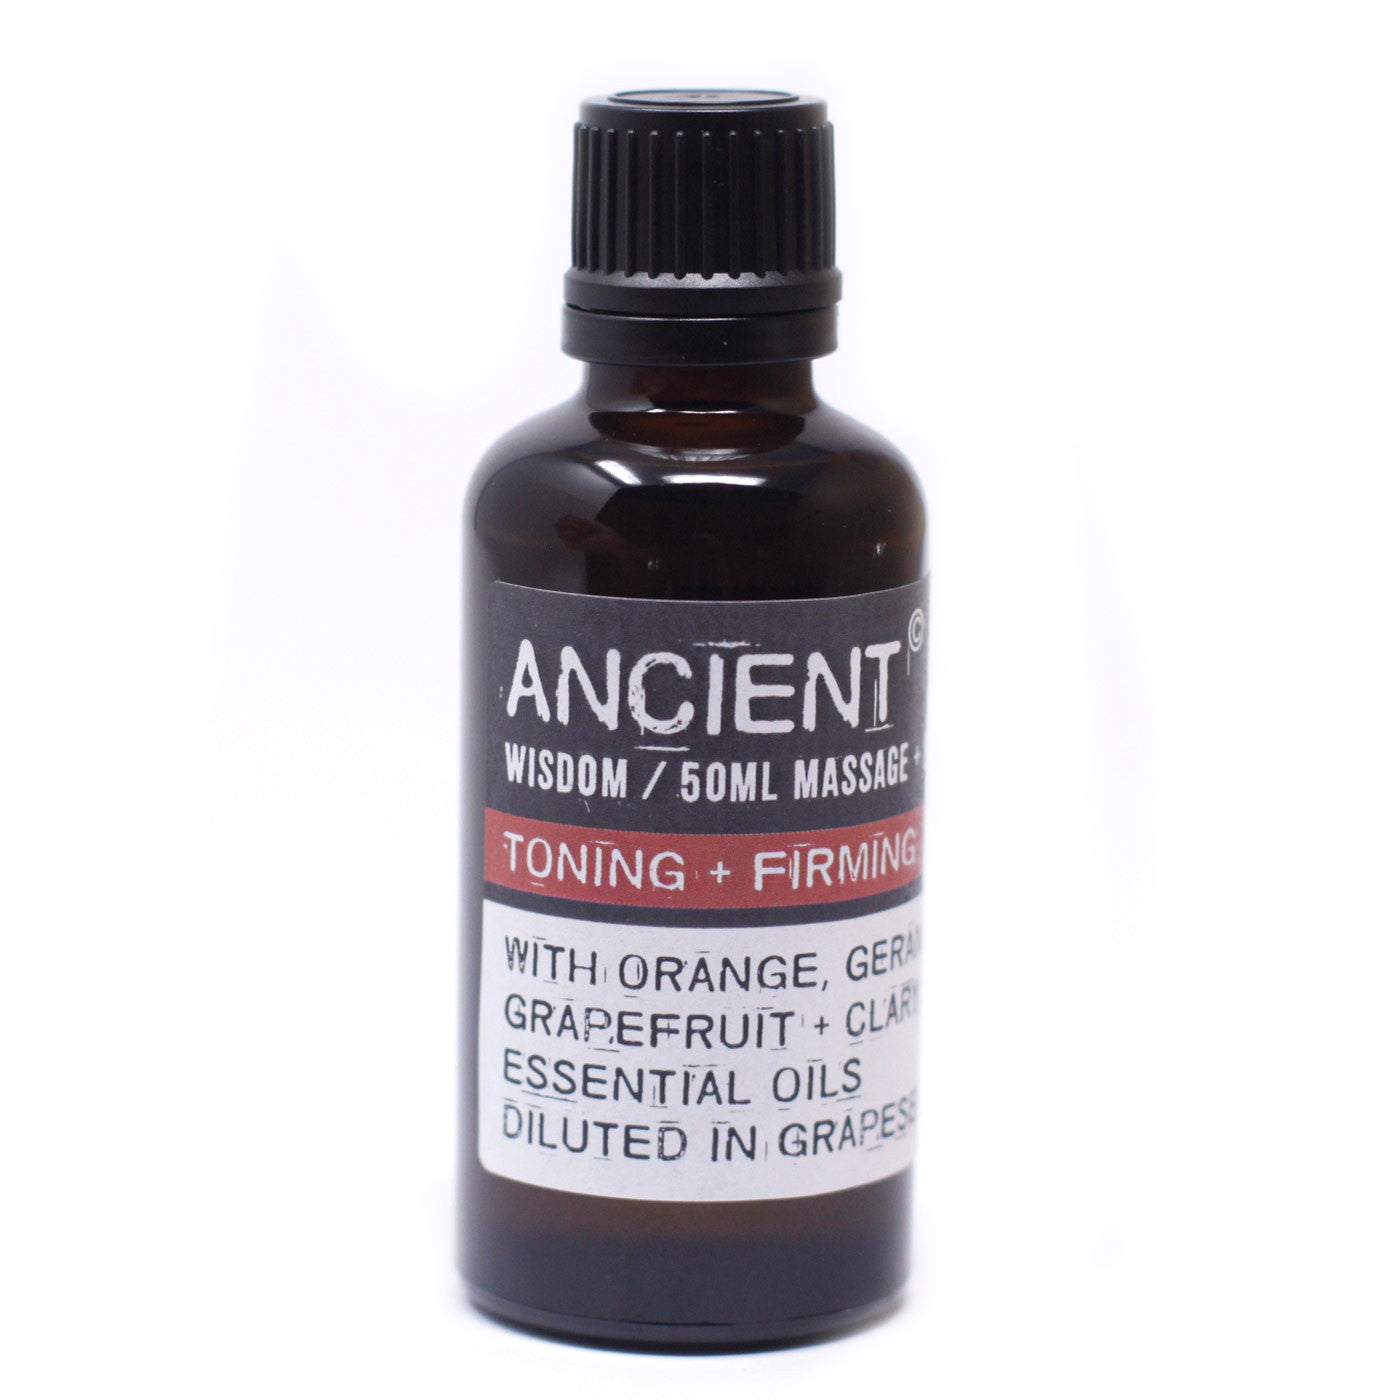 View Toning Firming Massage Oil 50ml information